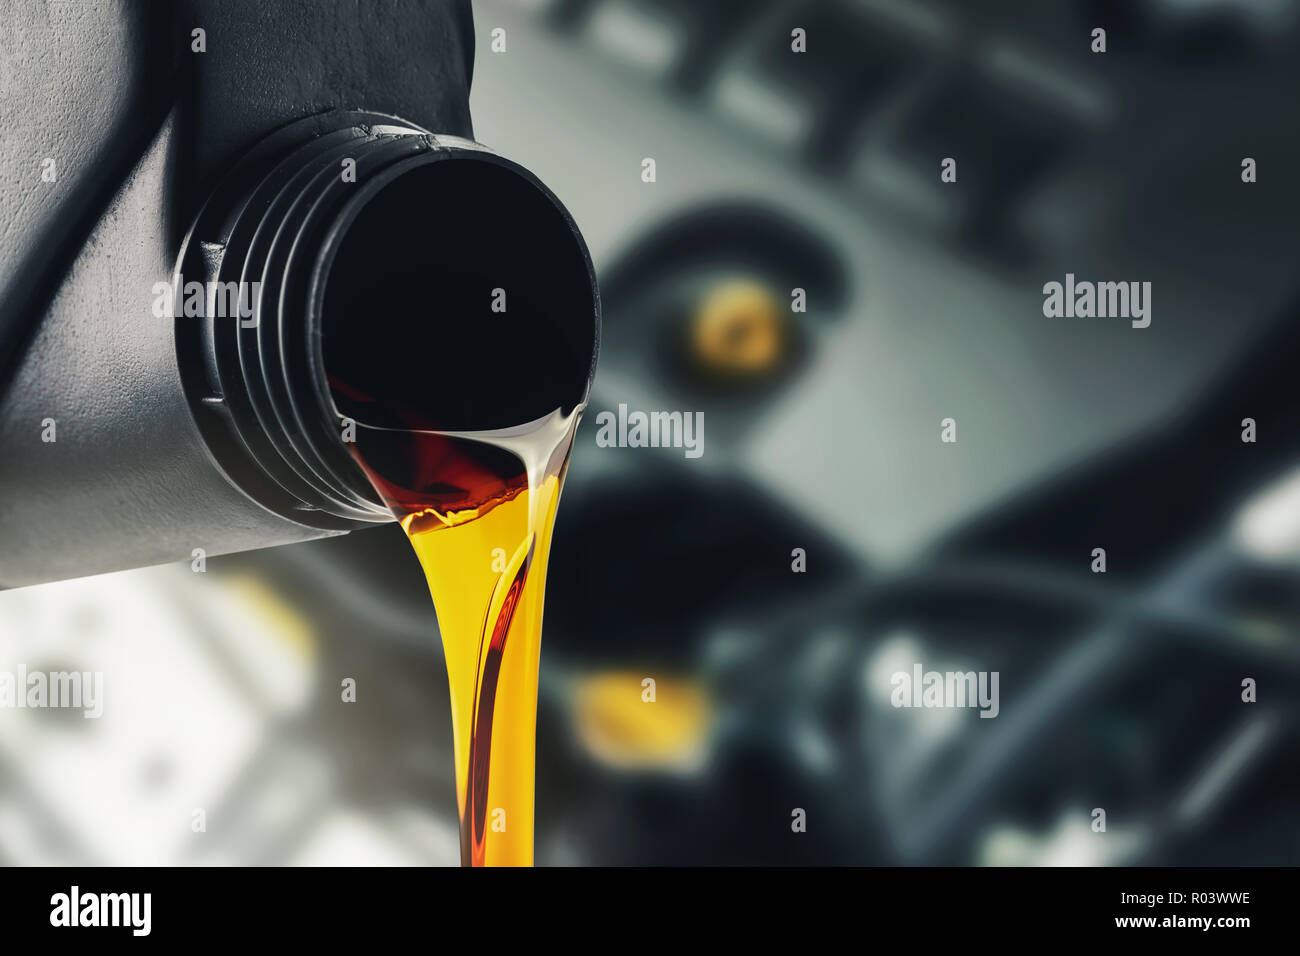 pouring changing car engine oil Stock Photo